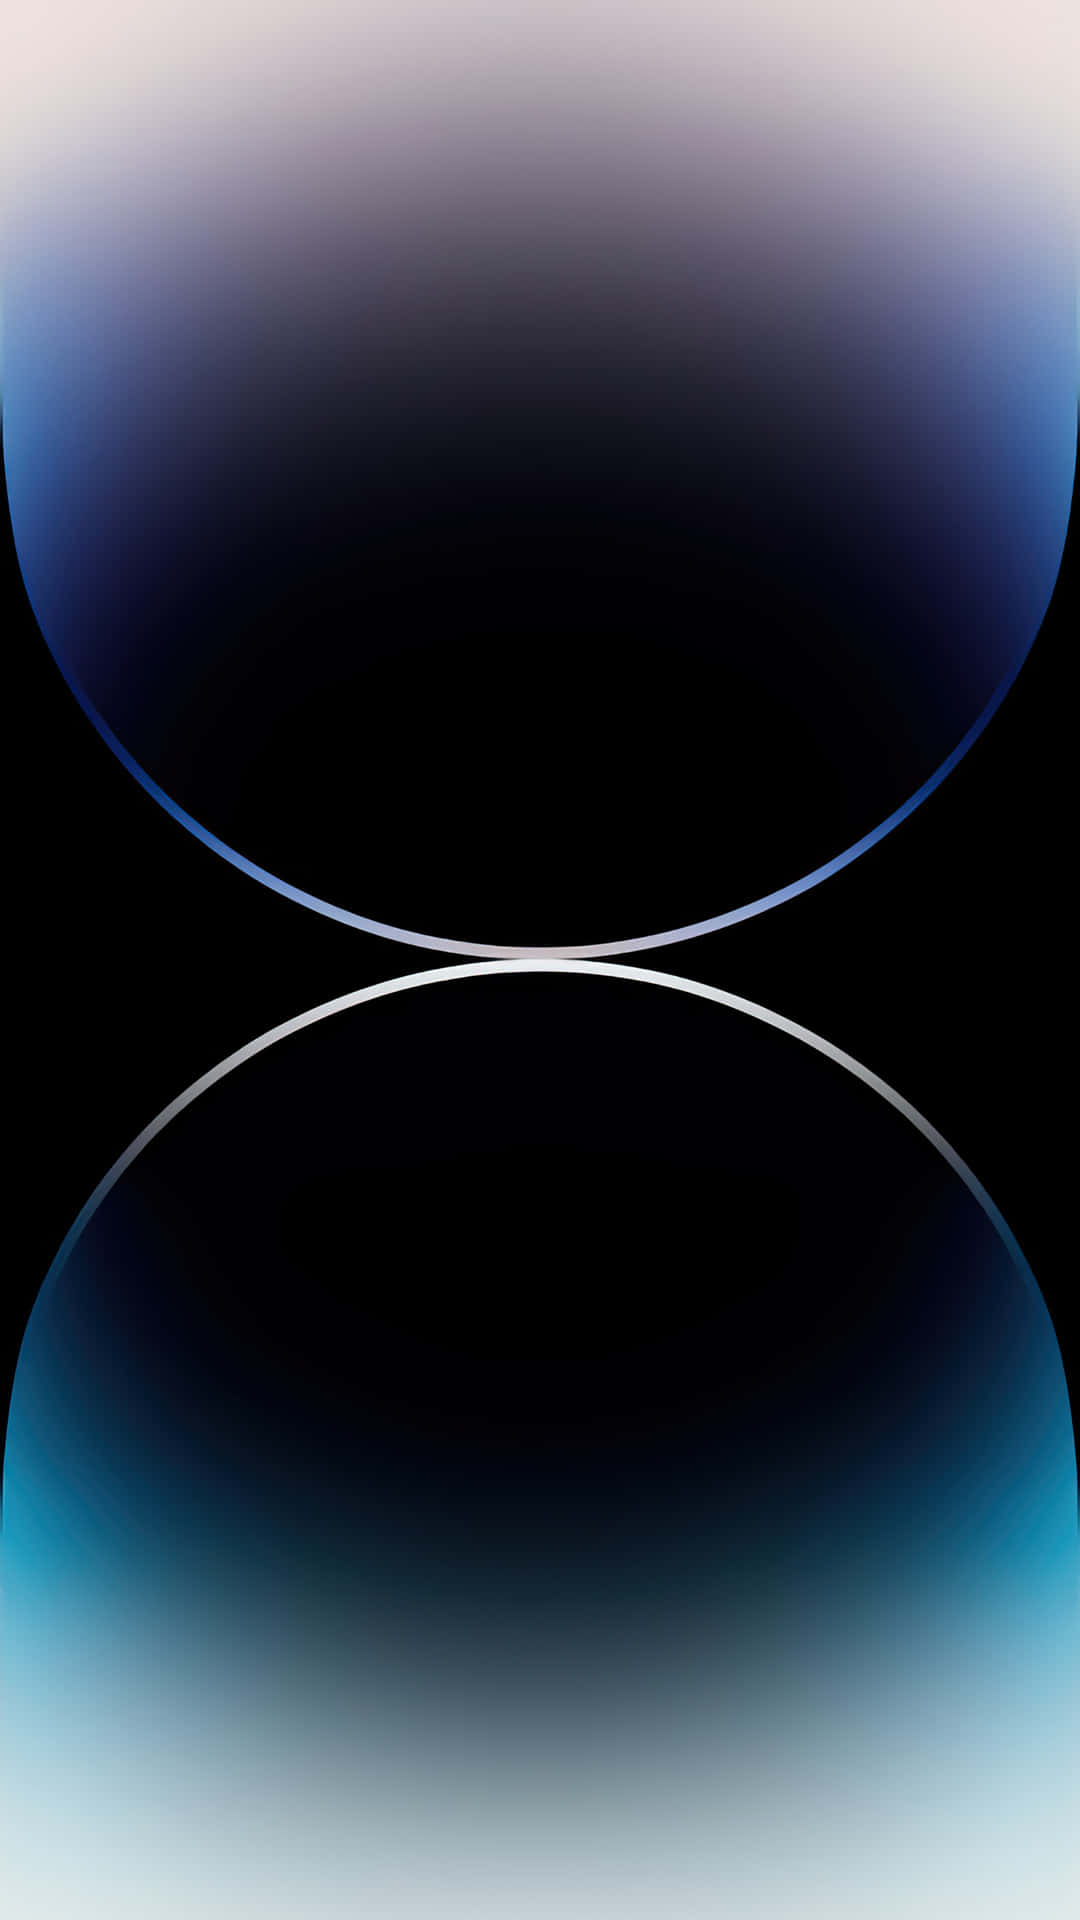 Gradient Blue And Black For Ios 3 Background